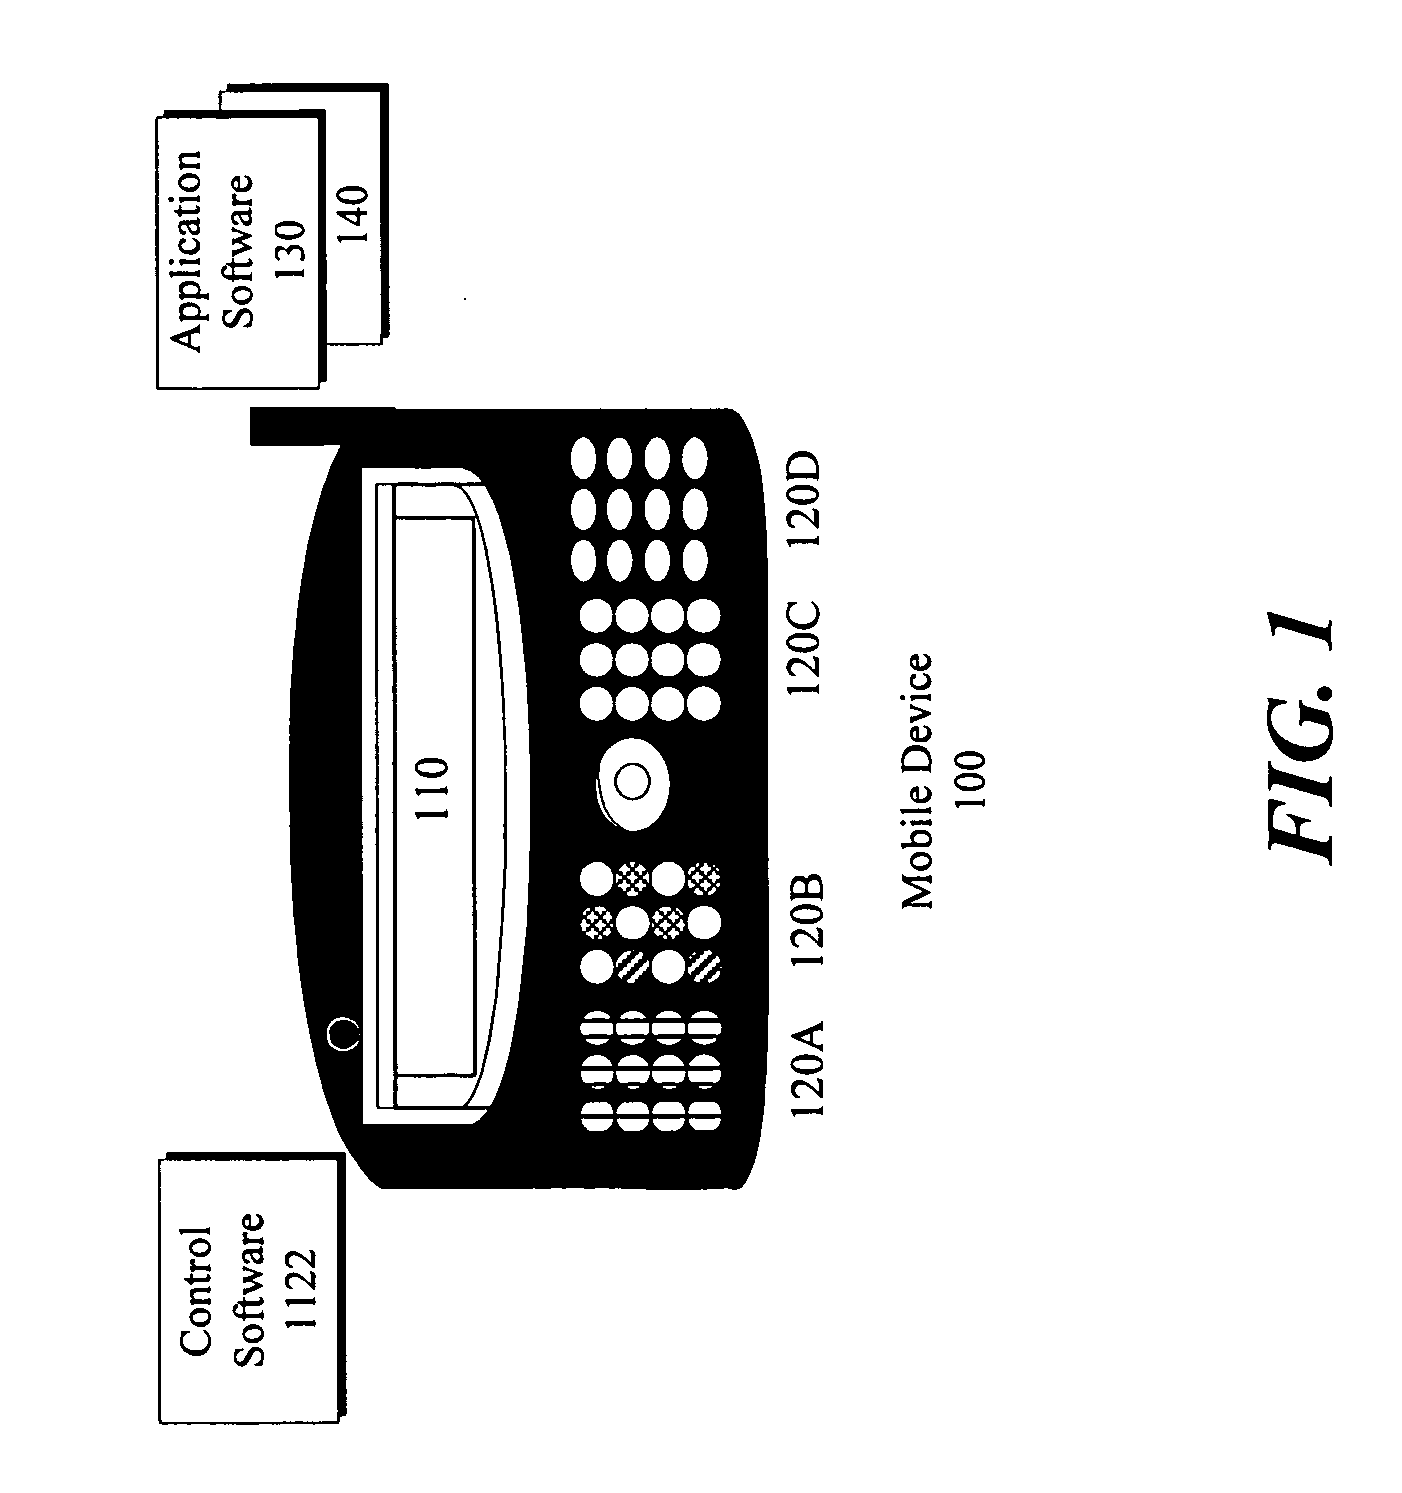 Application sensitive illumination system and method for a mobile computing device